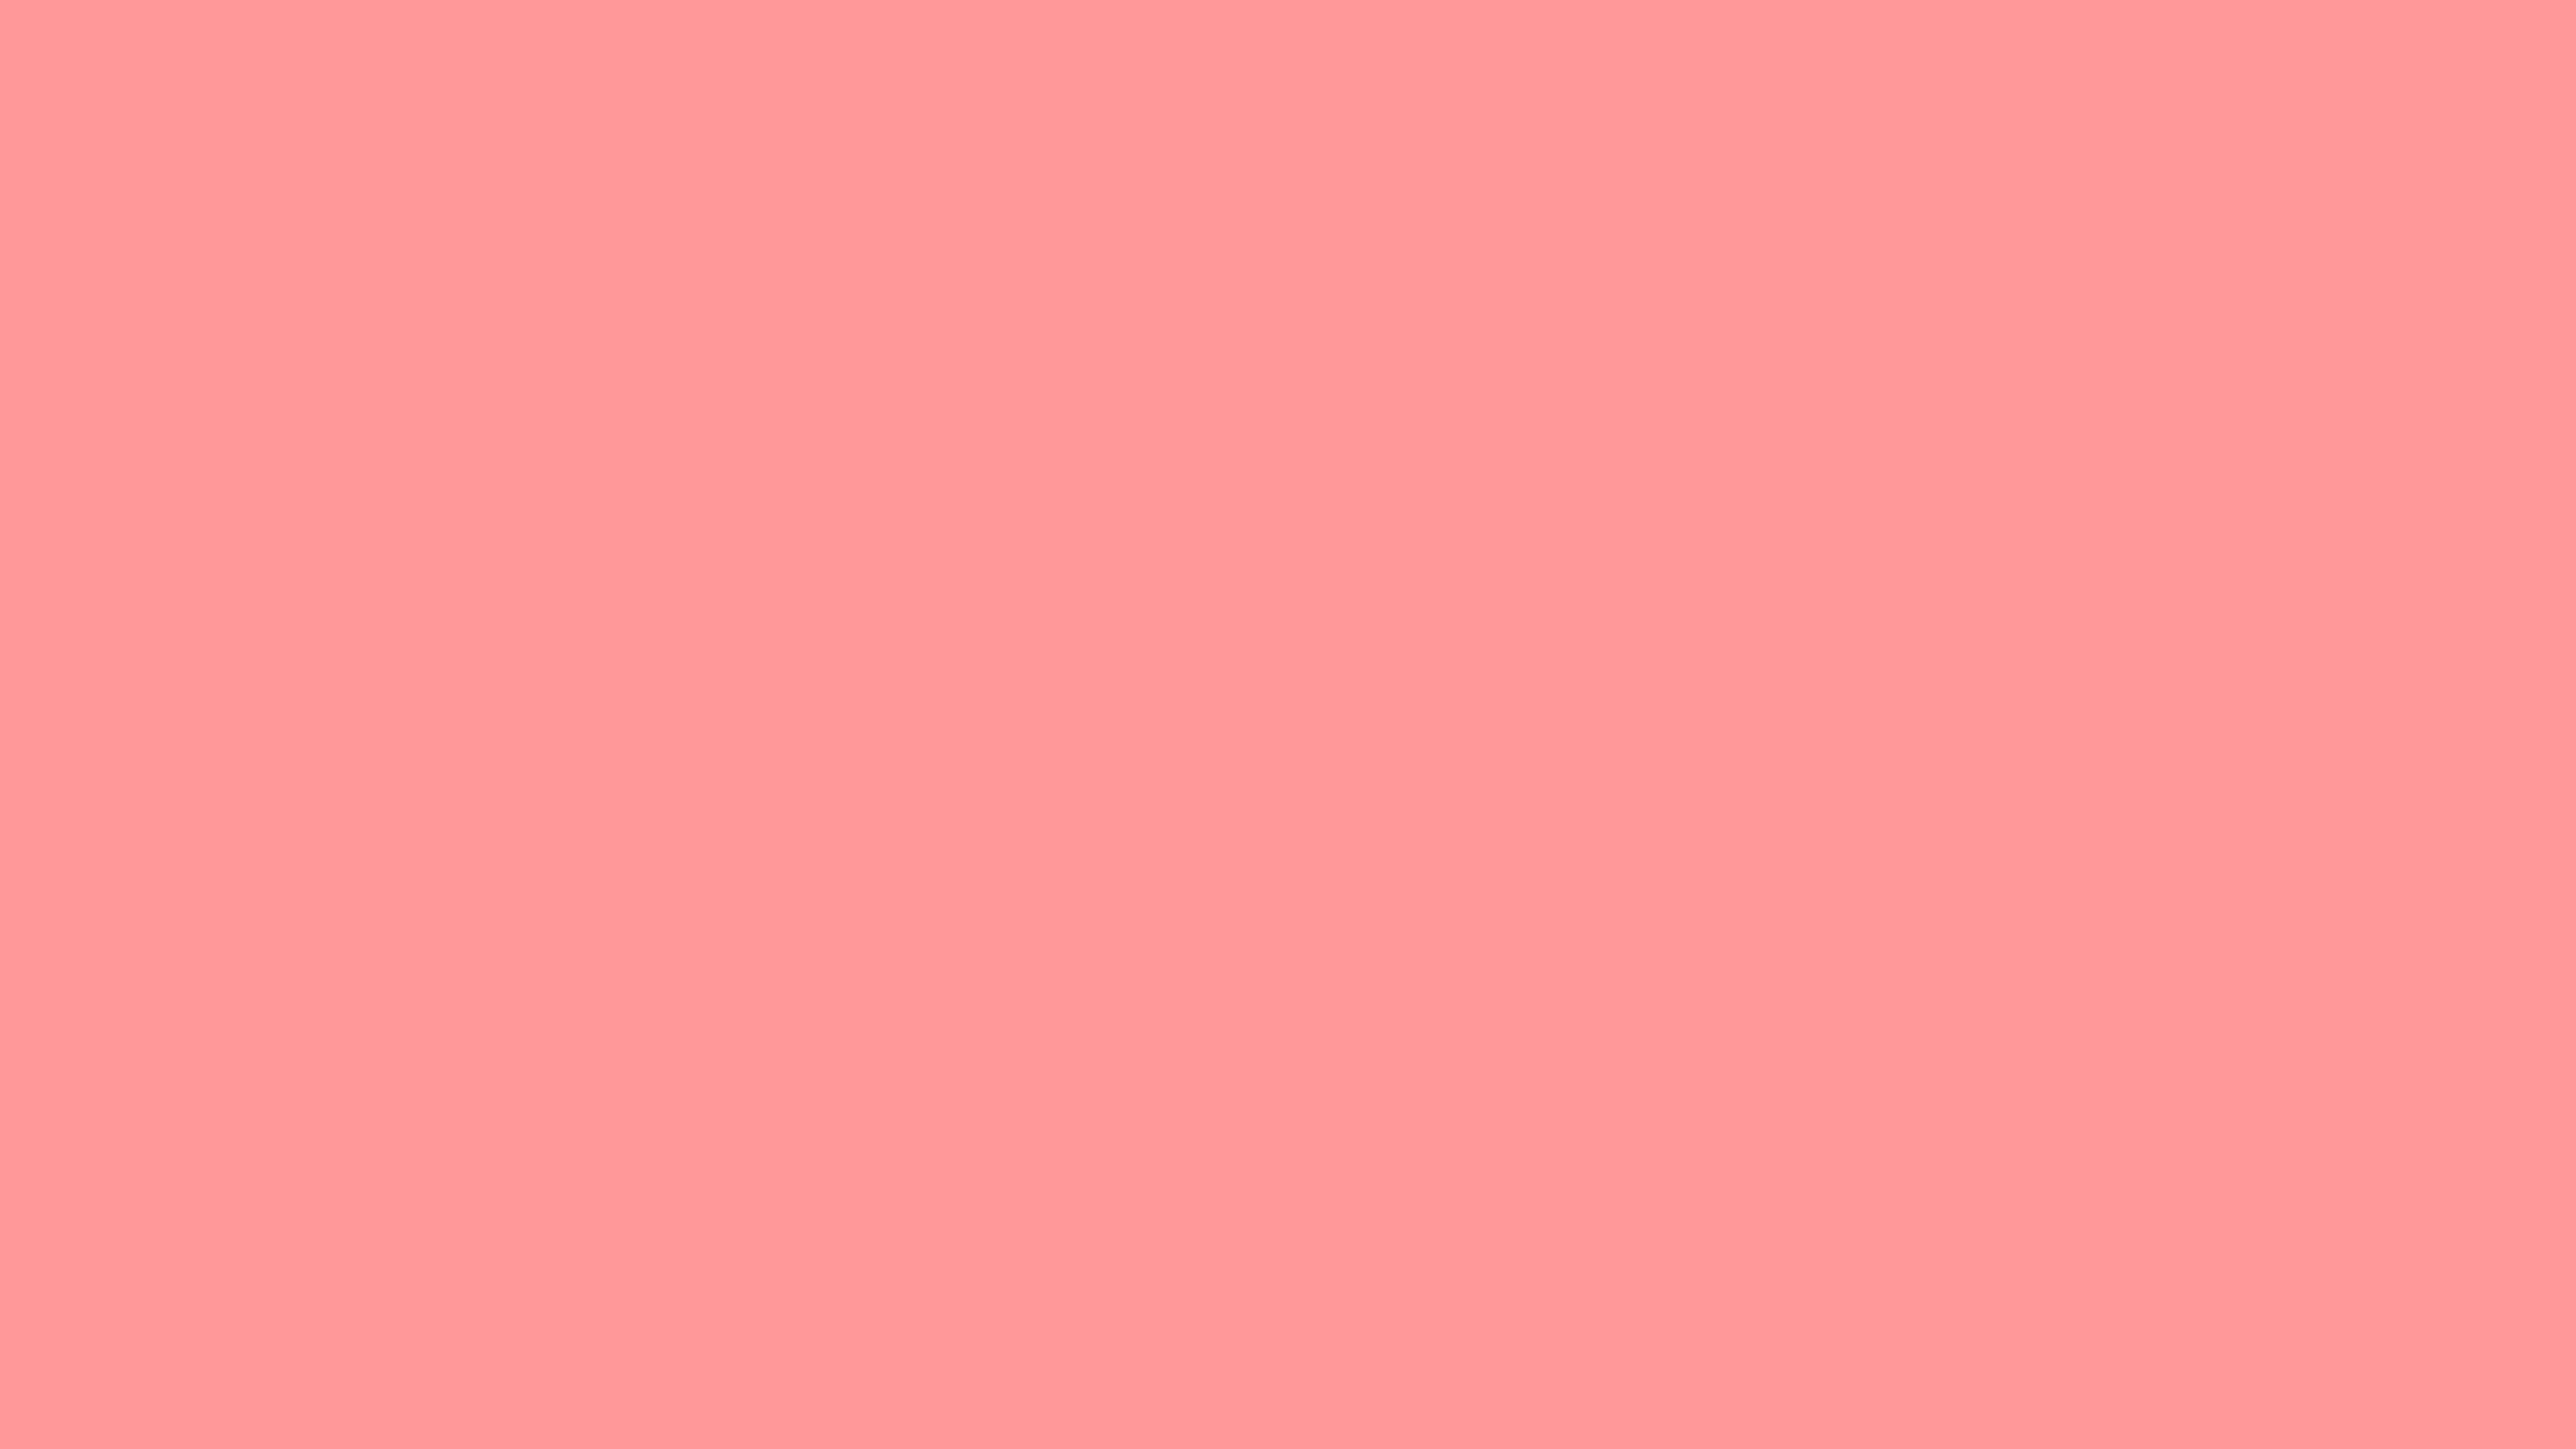 7680x4320 Light Salmon Pink Solid Color Background